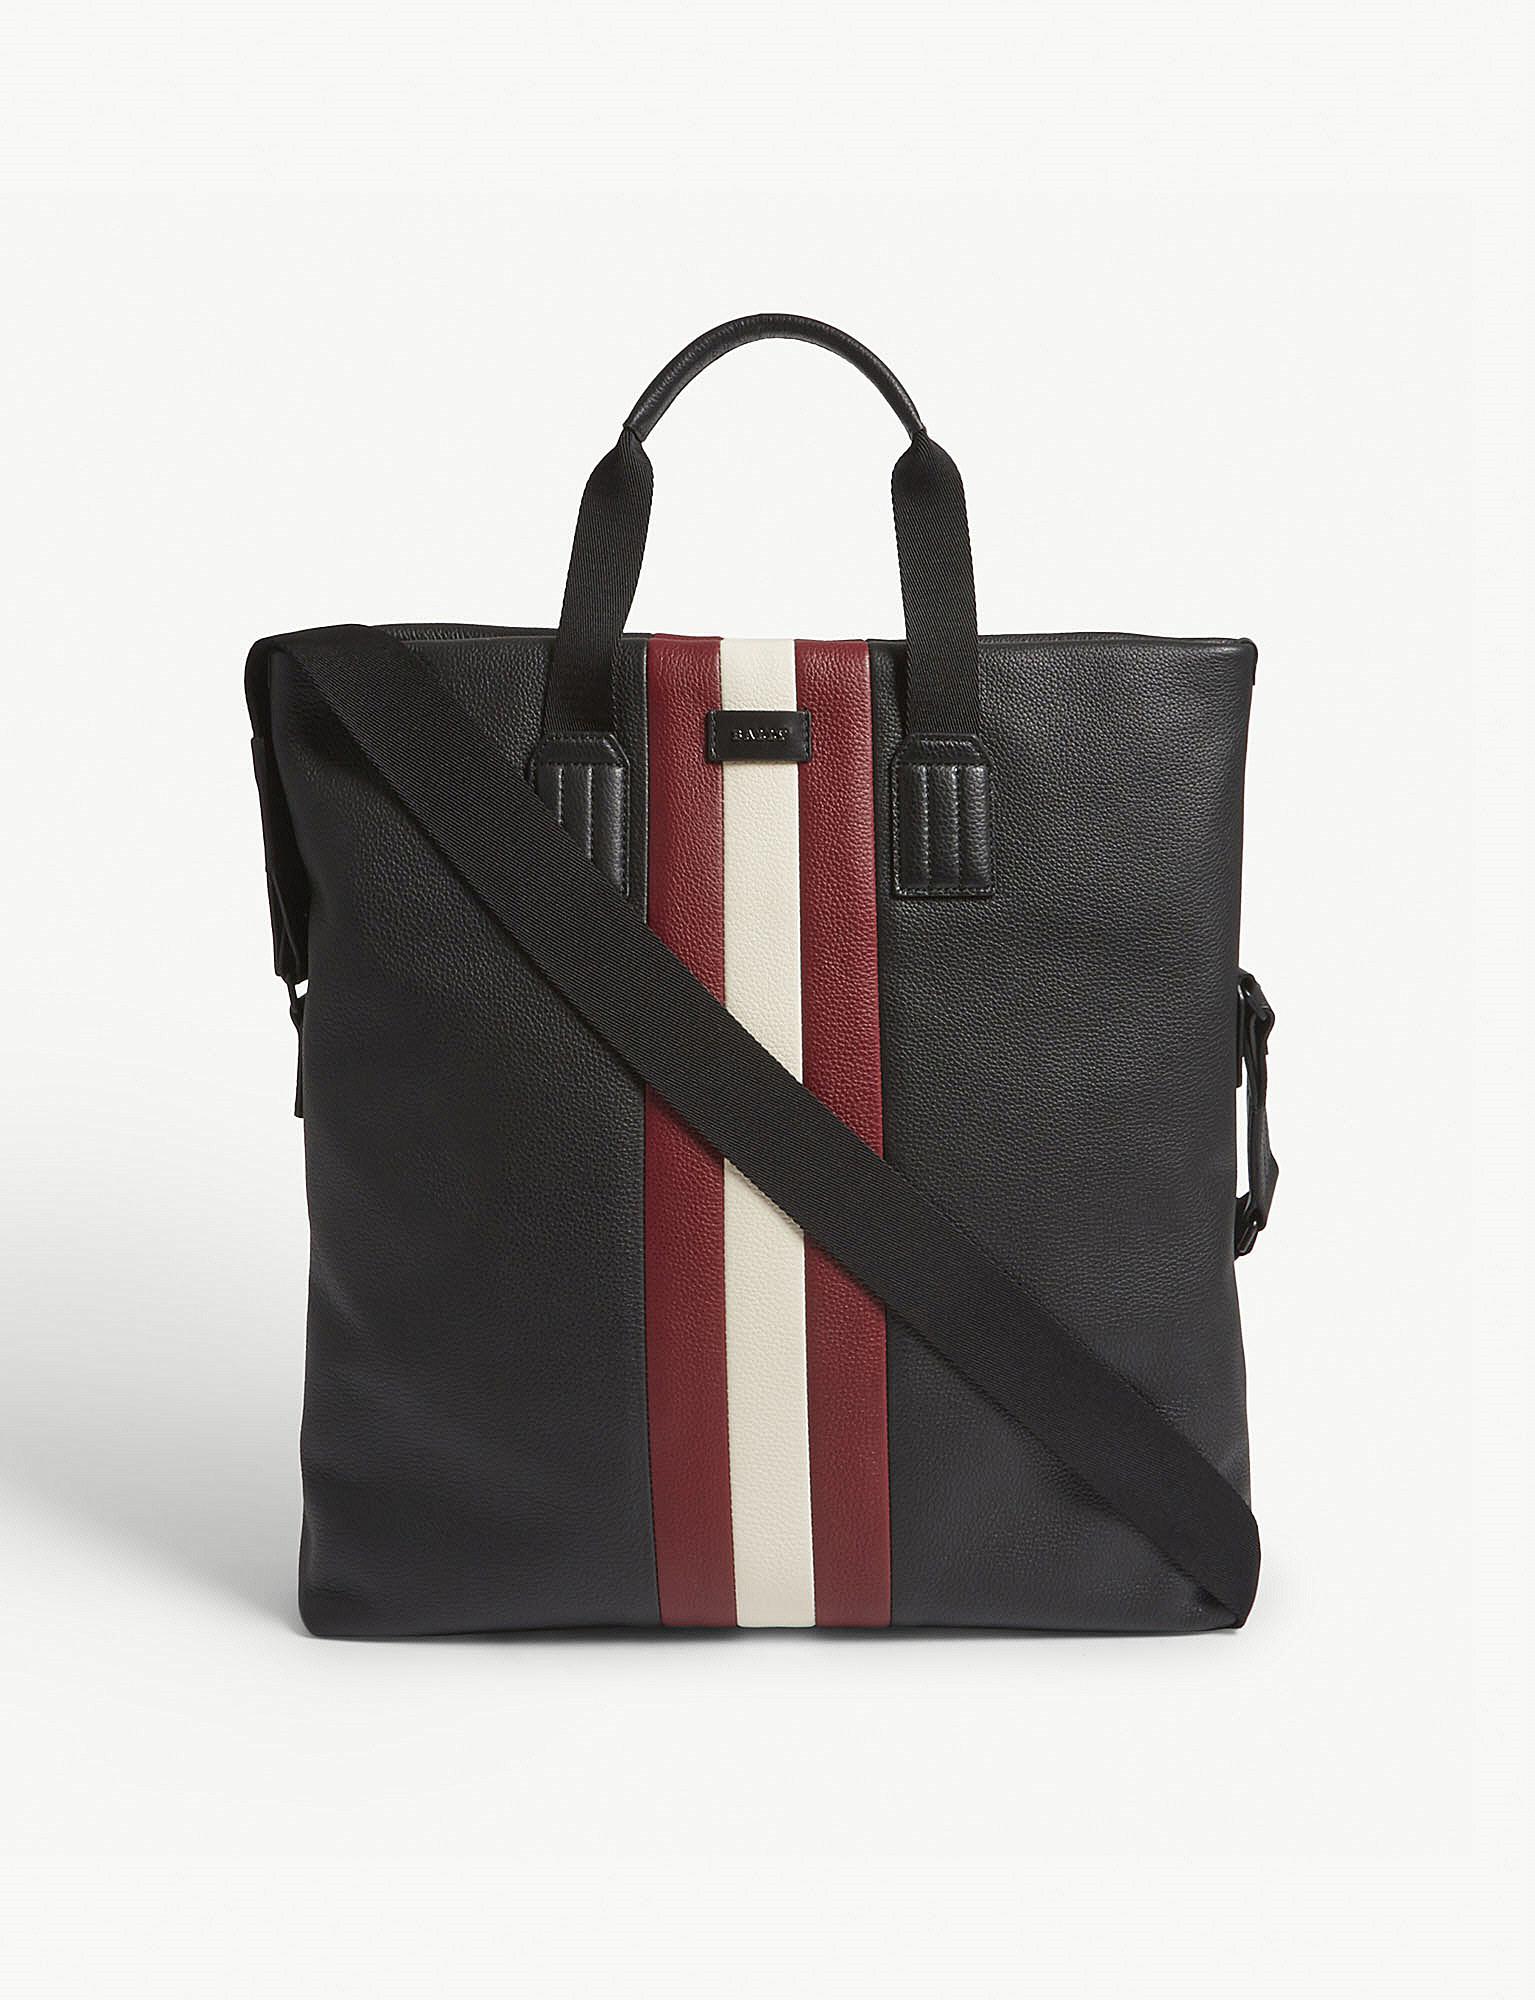 Bally Blaney Leather Tote Bag in Black | Lyst